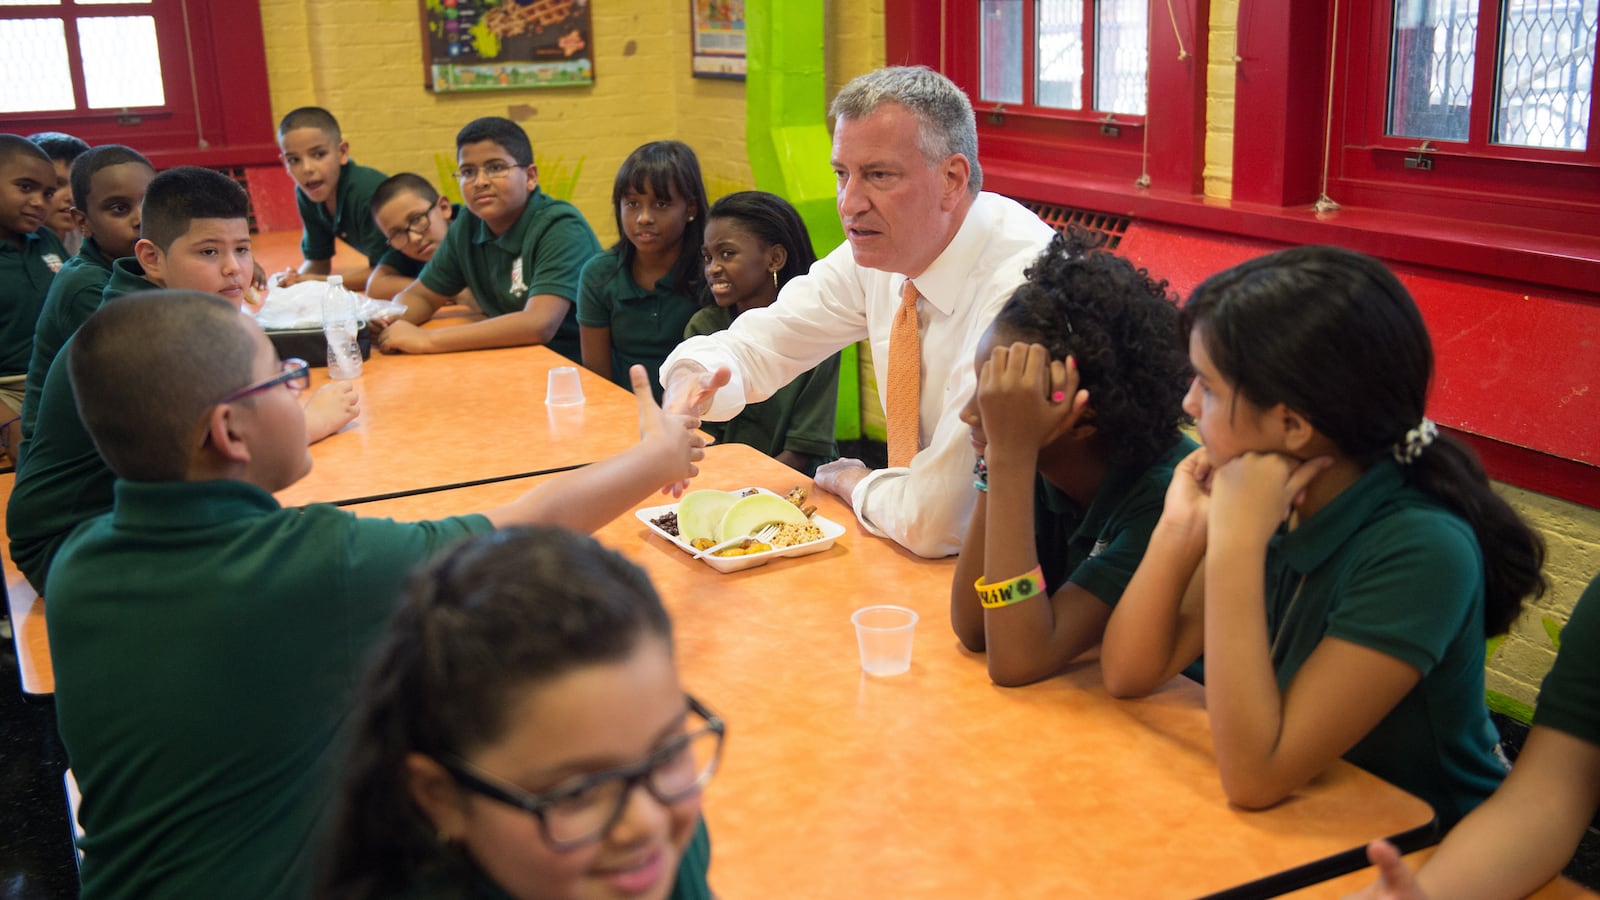 Mayor Bill de Blasio at lunch with students at P.S. 69 in the Bronx. (Rob Bennett/Mayoral Photography Office)